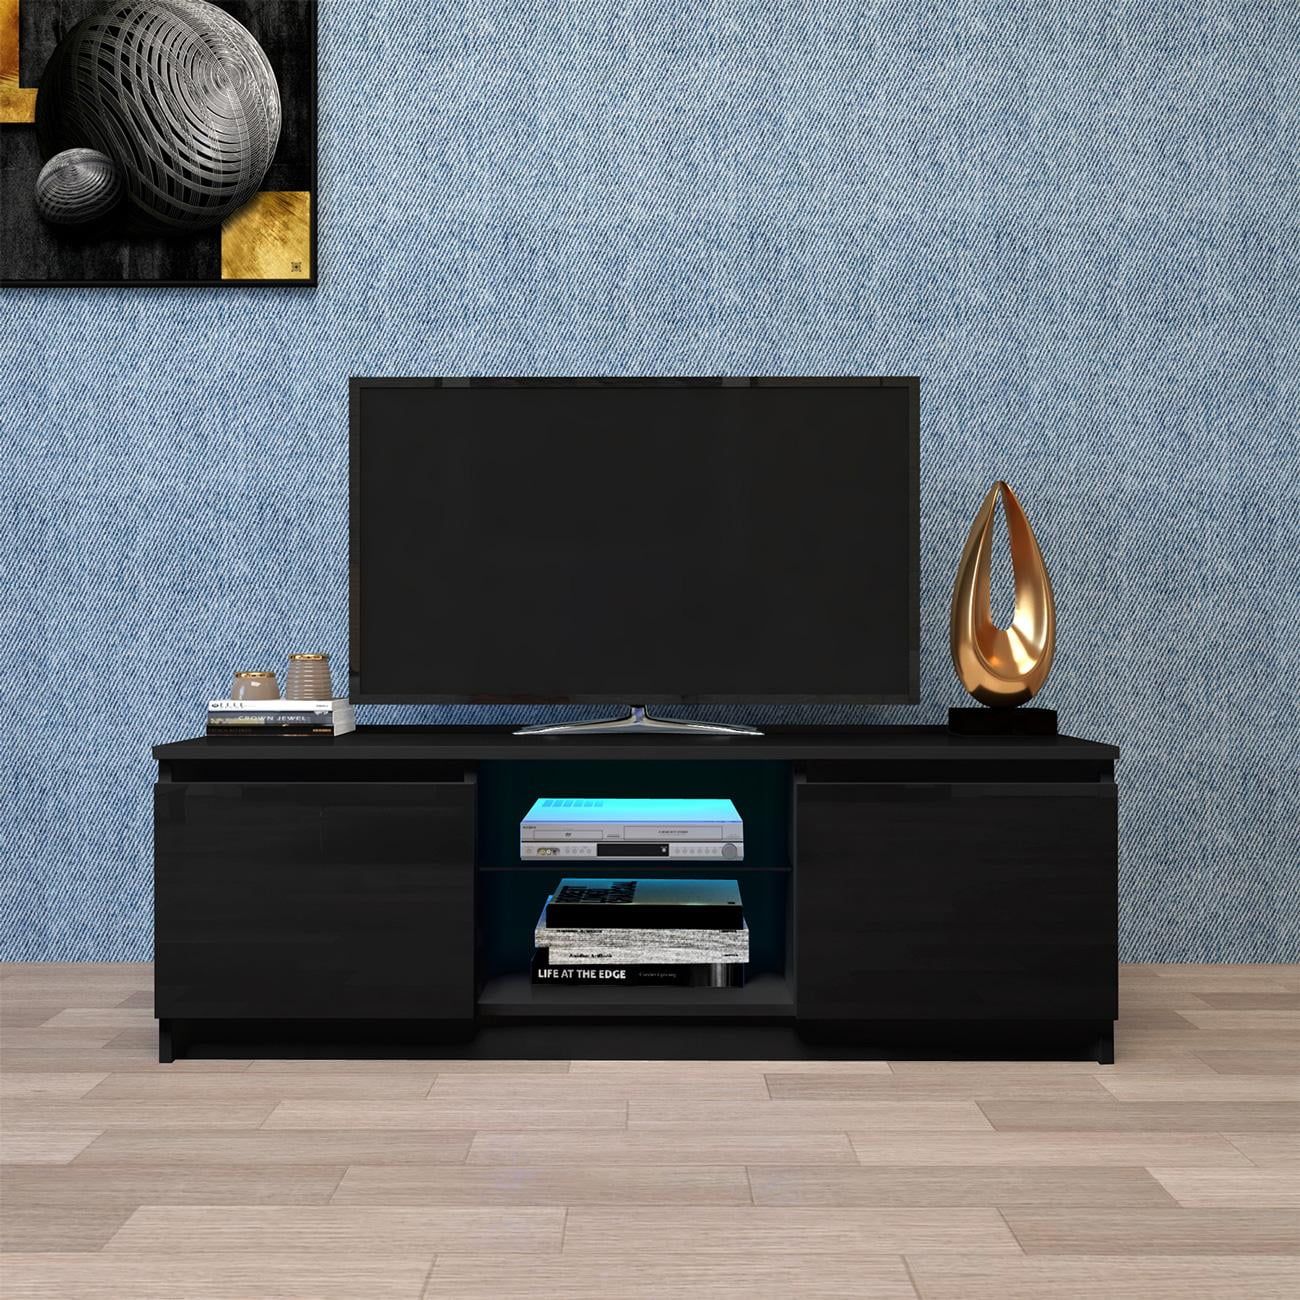 Tv Stand With Storage Drawers Shelves Led Rgb Lights, For Flat Tv 40 55 Inside Led Tv Stands With Outlet (Gallery 17 of 20)